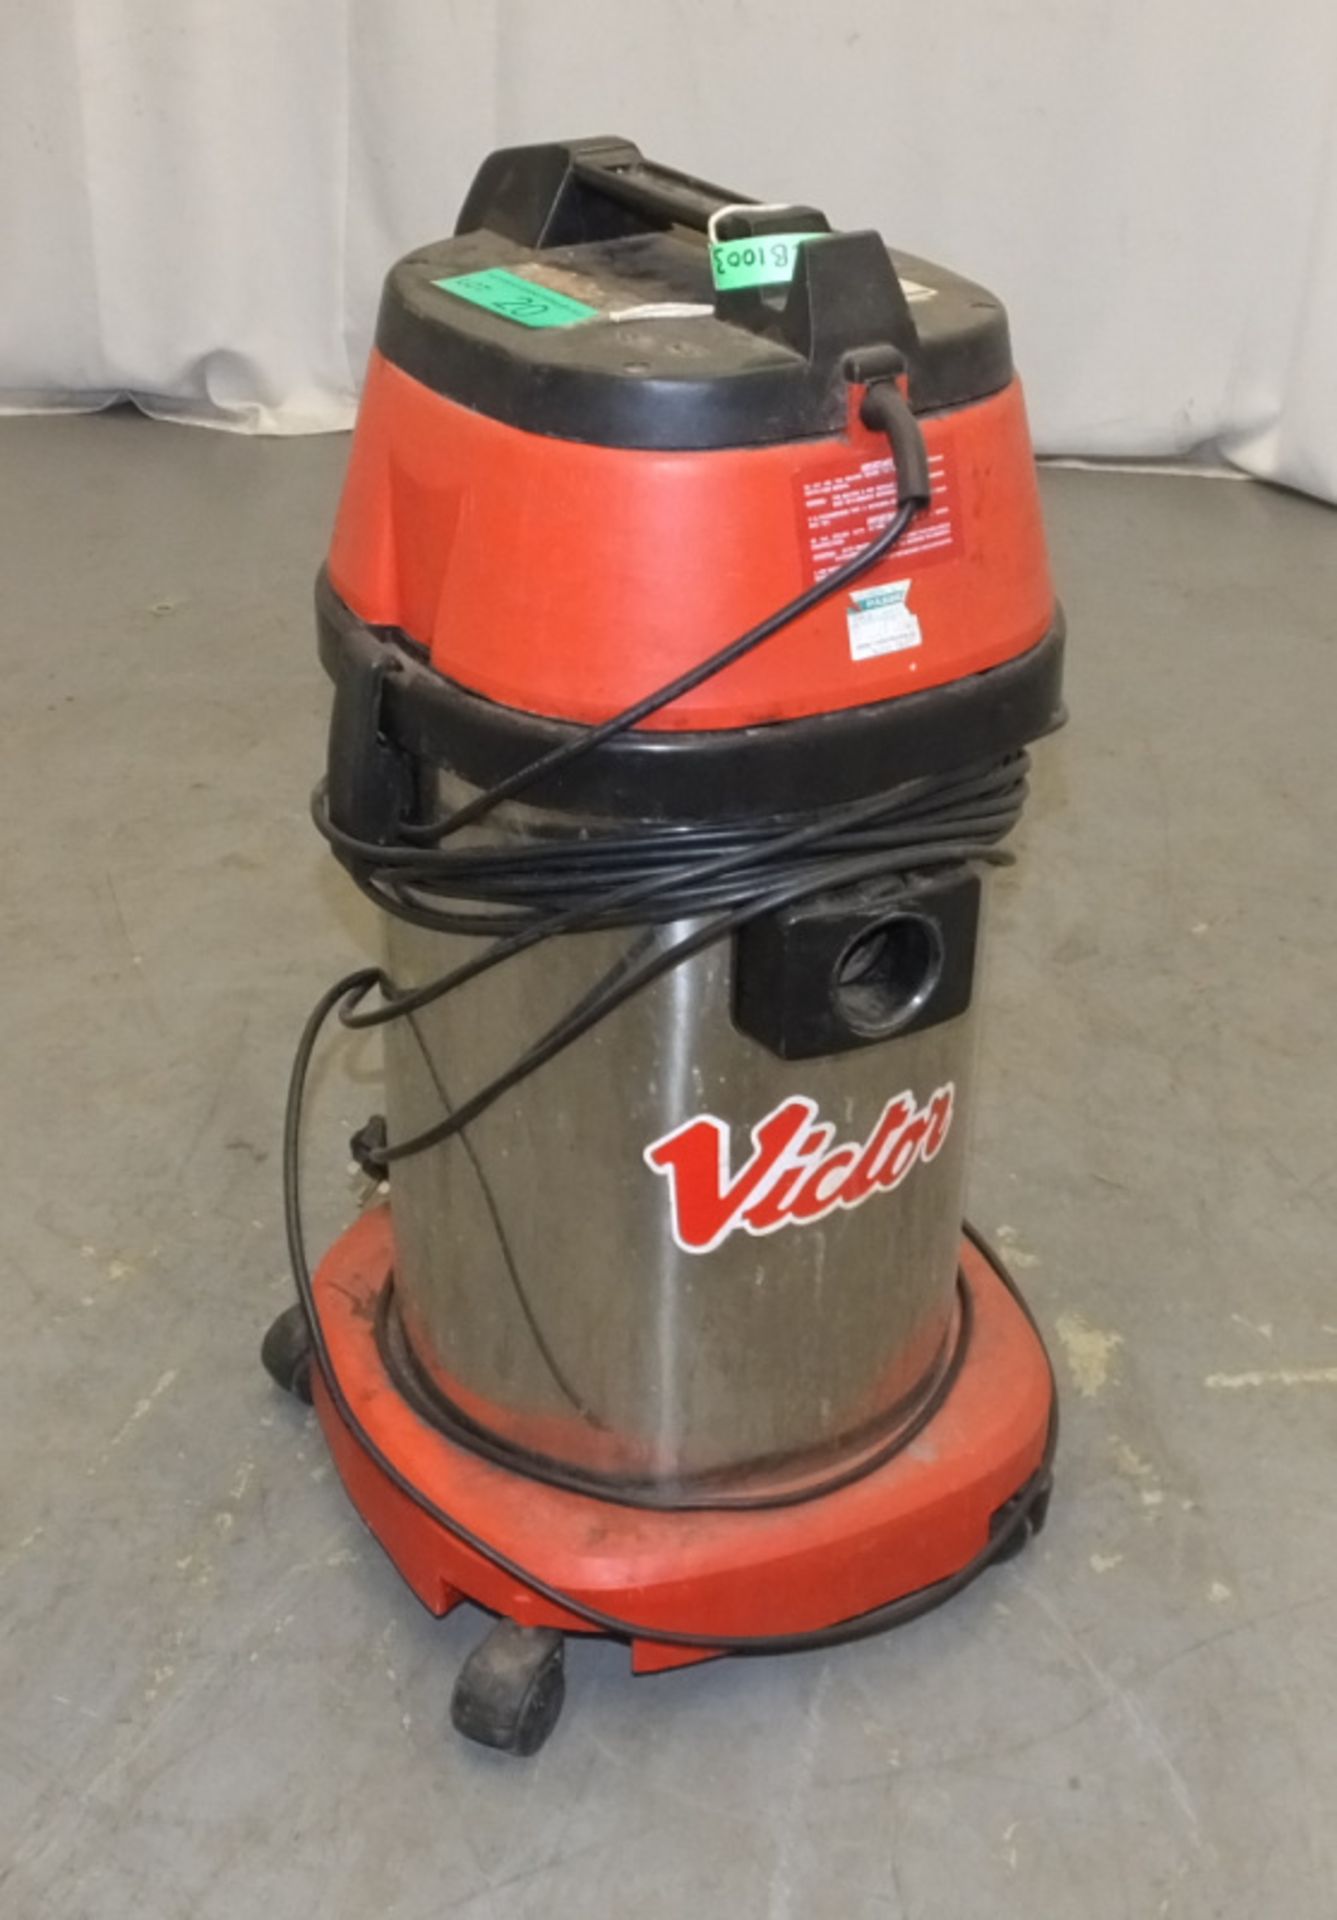 Victor WD30 Wet/Dry Vacuum Cleaner - powers up - functionality untested